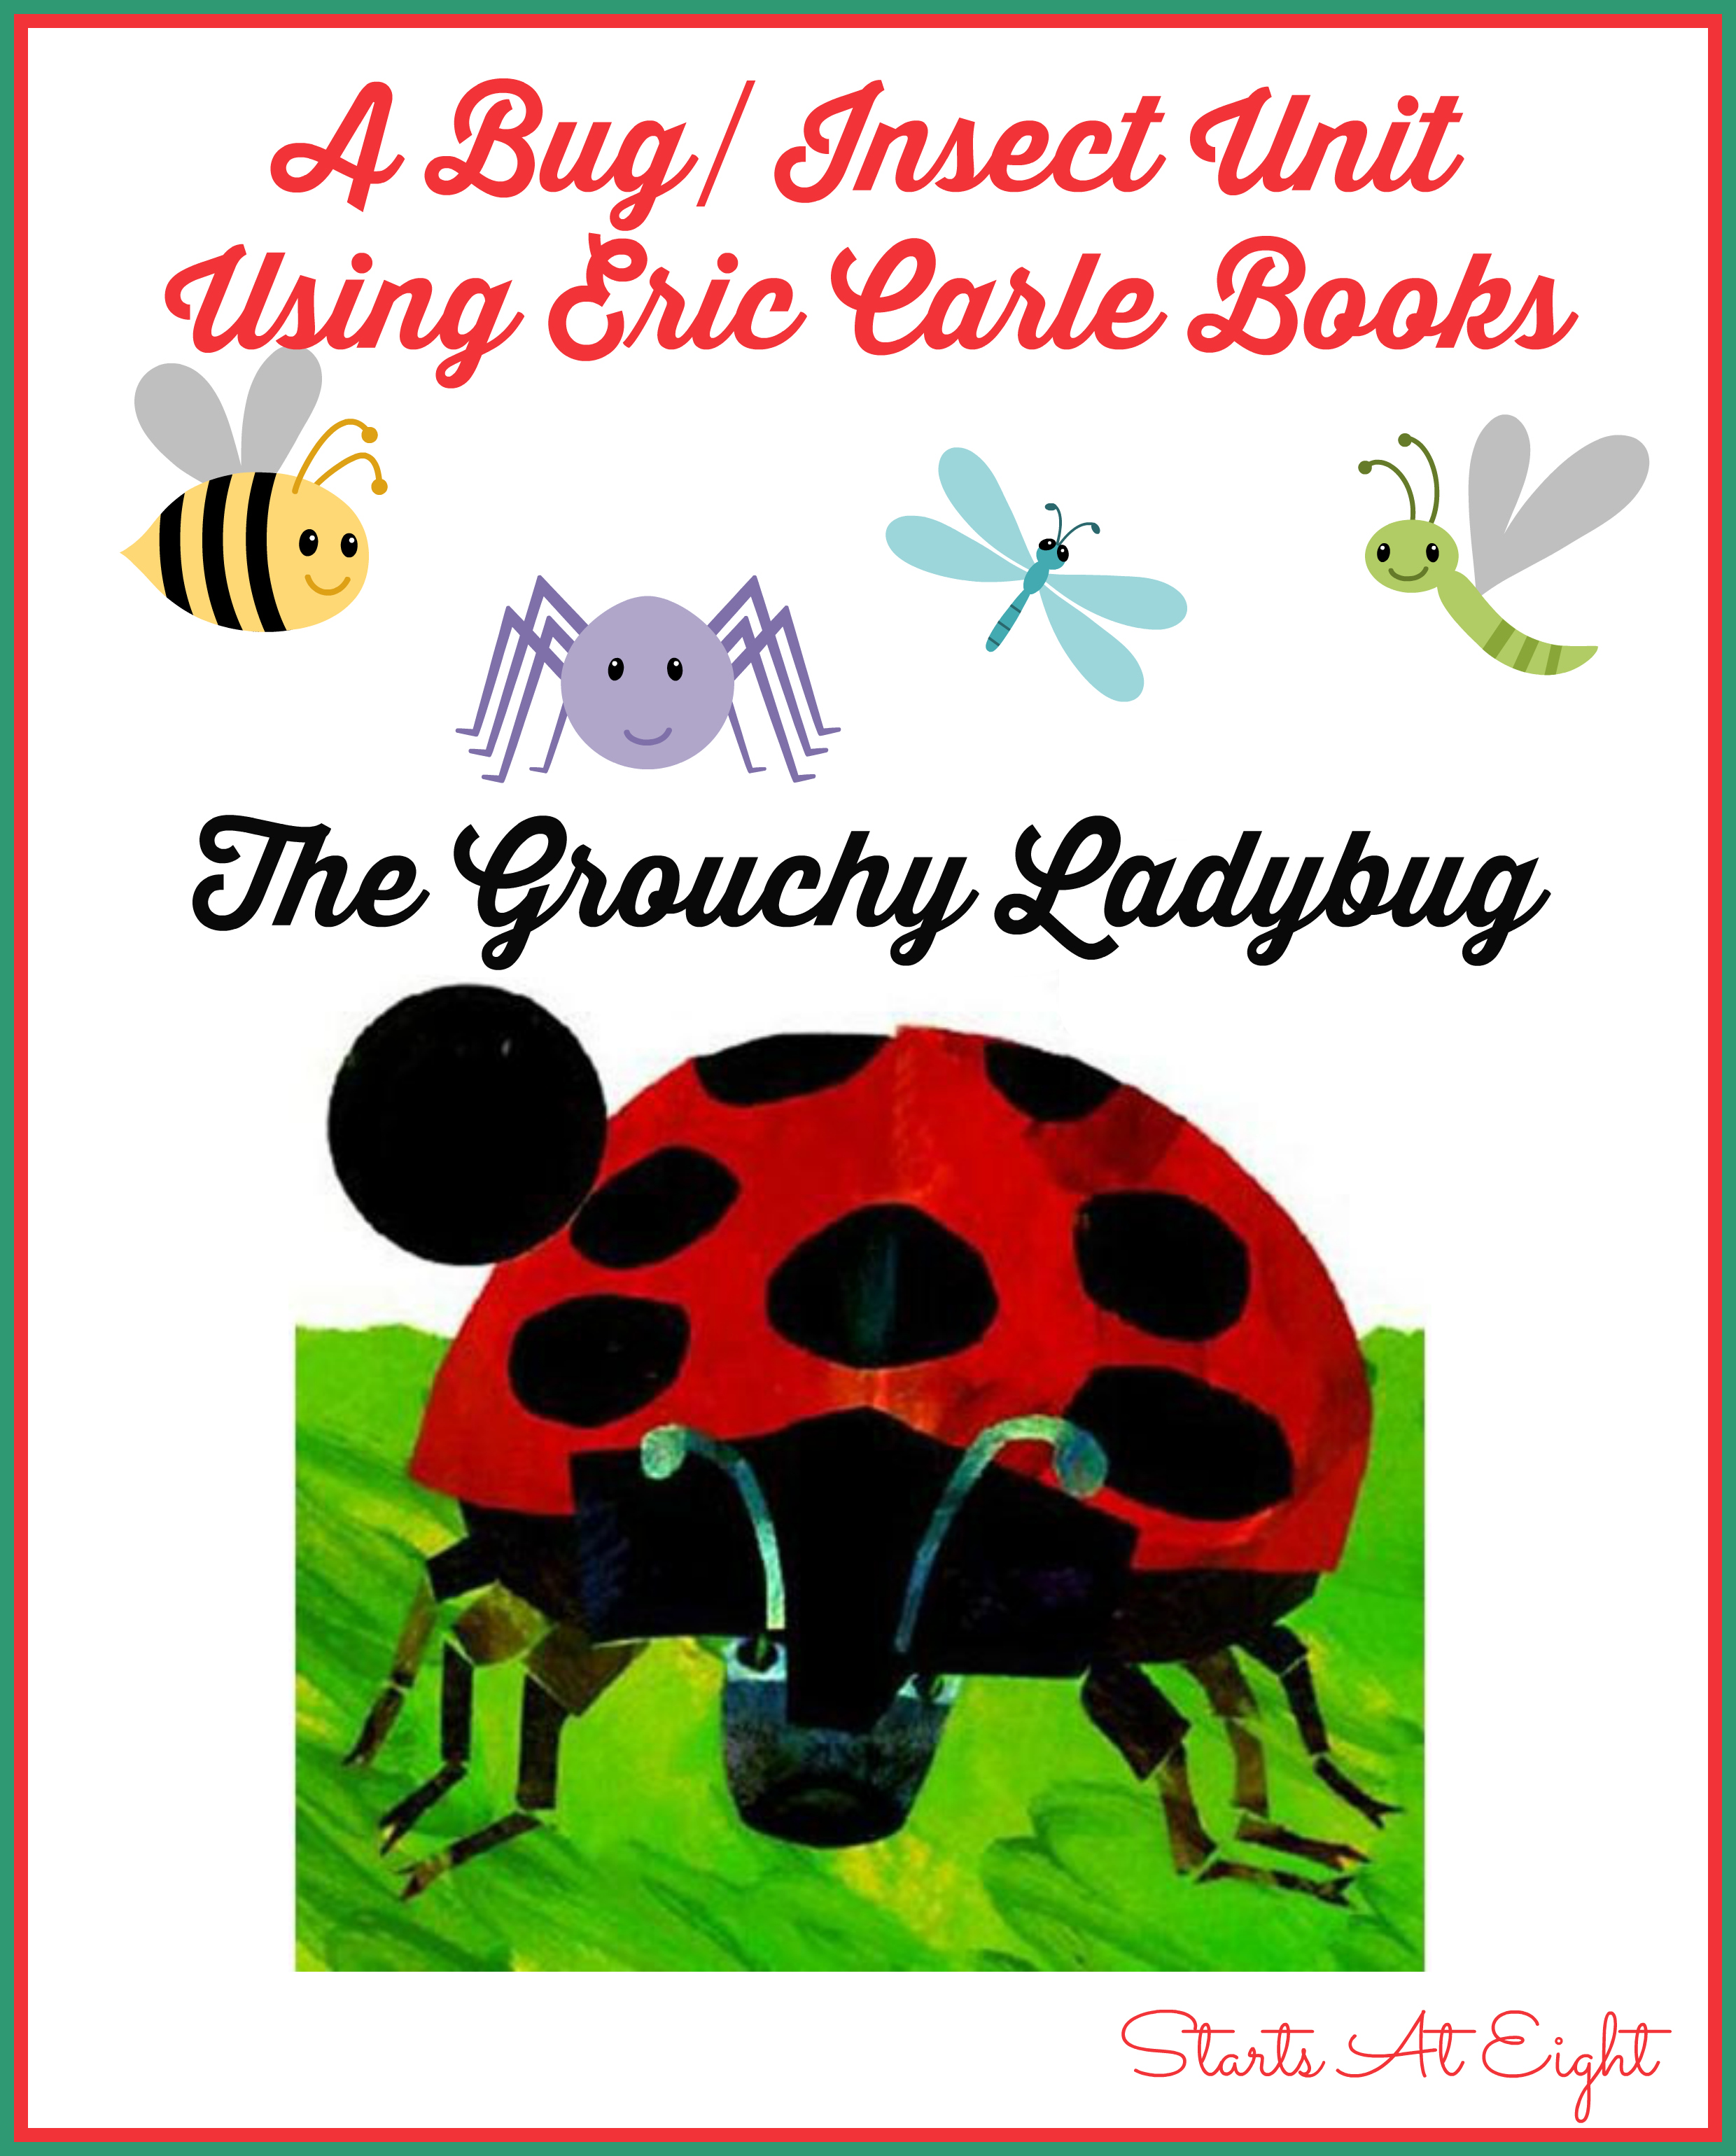 A Bug/Insect Unit Using Eric Carle Books The Grouchy Ladybug